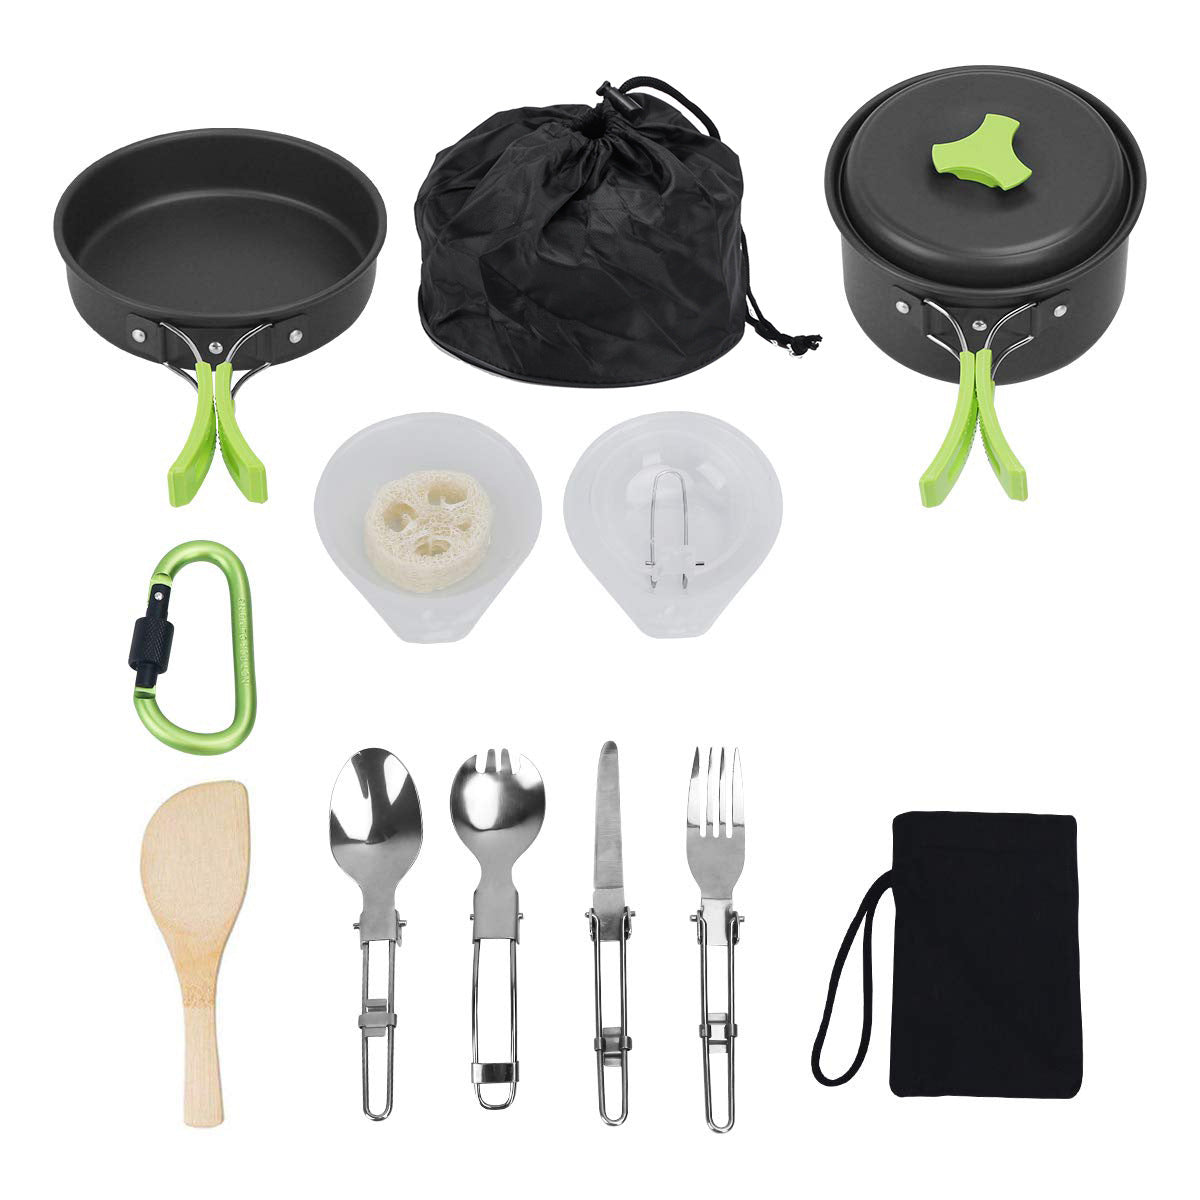 A solid, lightweight and portable camping cookware set.